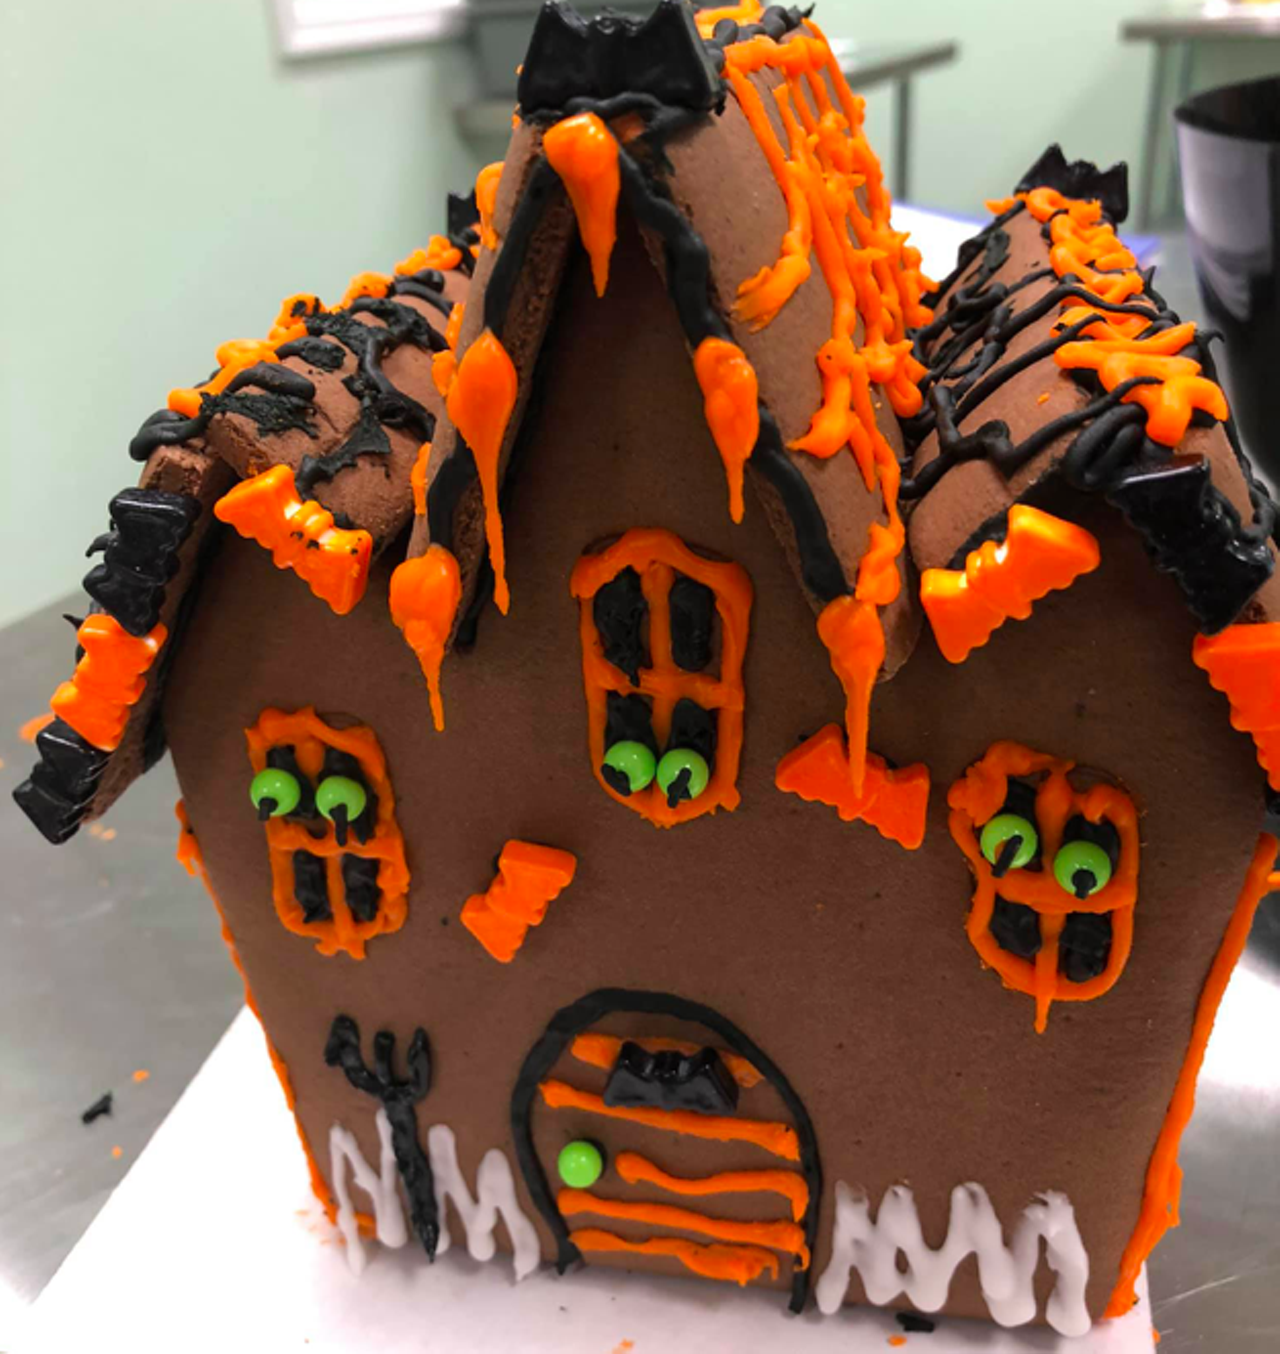 Haunted Gingerbread House Decorating
20709 Center Oak Dr., Tampa
Dates: Oct. 31 from 12:30 p.m.-2 p.m.
Flex your artistic muscles by decorating haunted gingerbread houses this Halloween at Young Chefs Academy of Wesley Chapel-New Tampa. For kids 4 and up, this event requires pre-registration to attend. Also, be sure to wear closed to shoes and hair pulled back for kitchen safety.
Photo via Young Chefs Academy of Wesley Chapel-New Tampa/Facebook